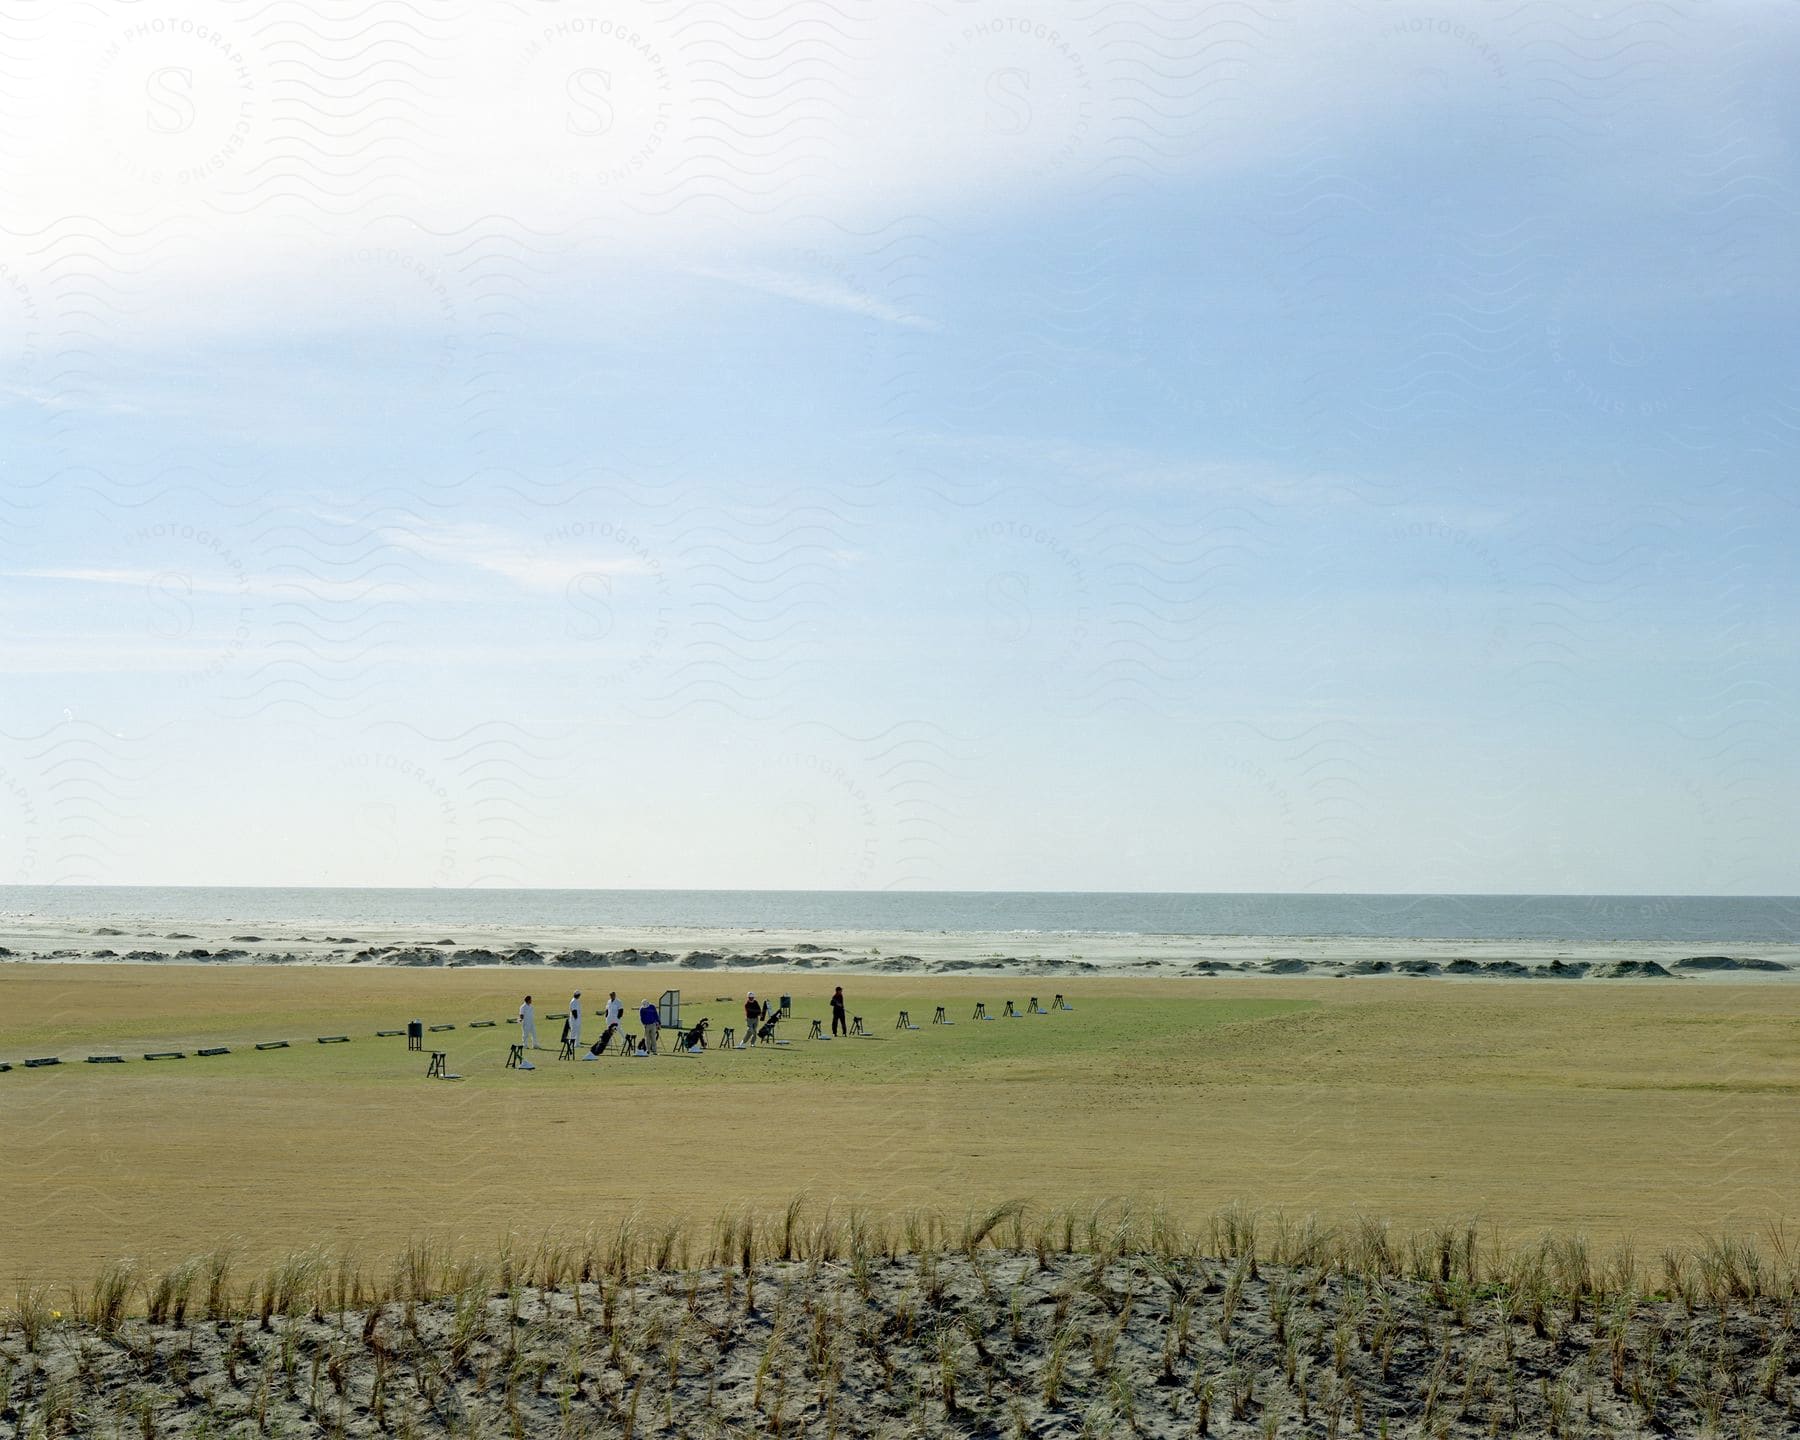 A wide field with clear clouds and people standing